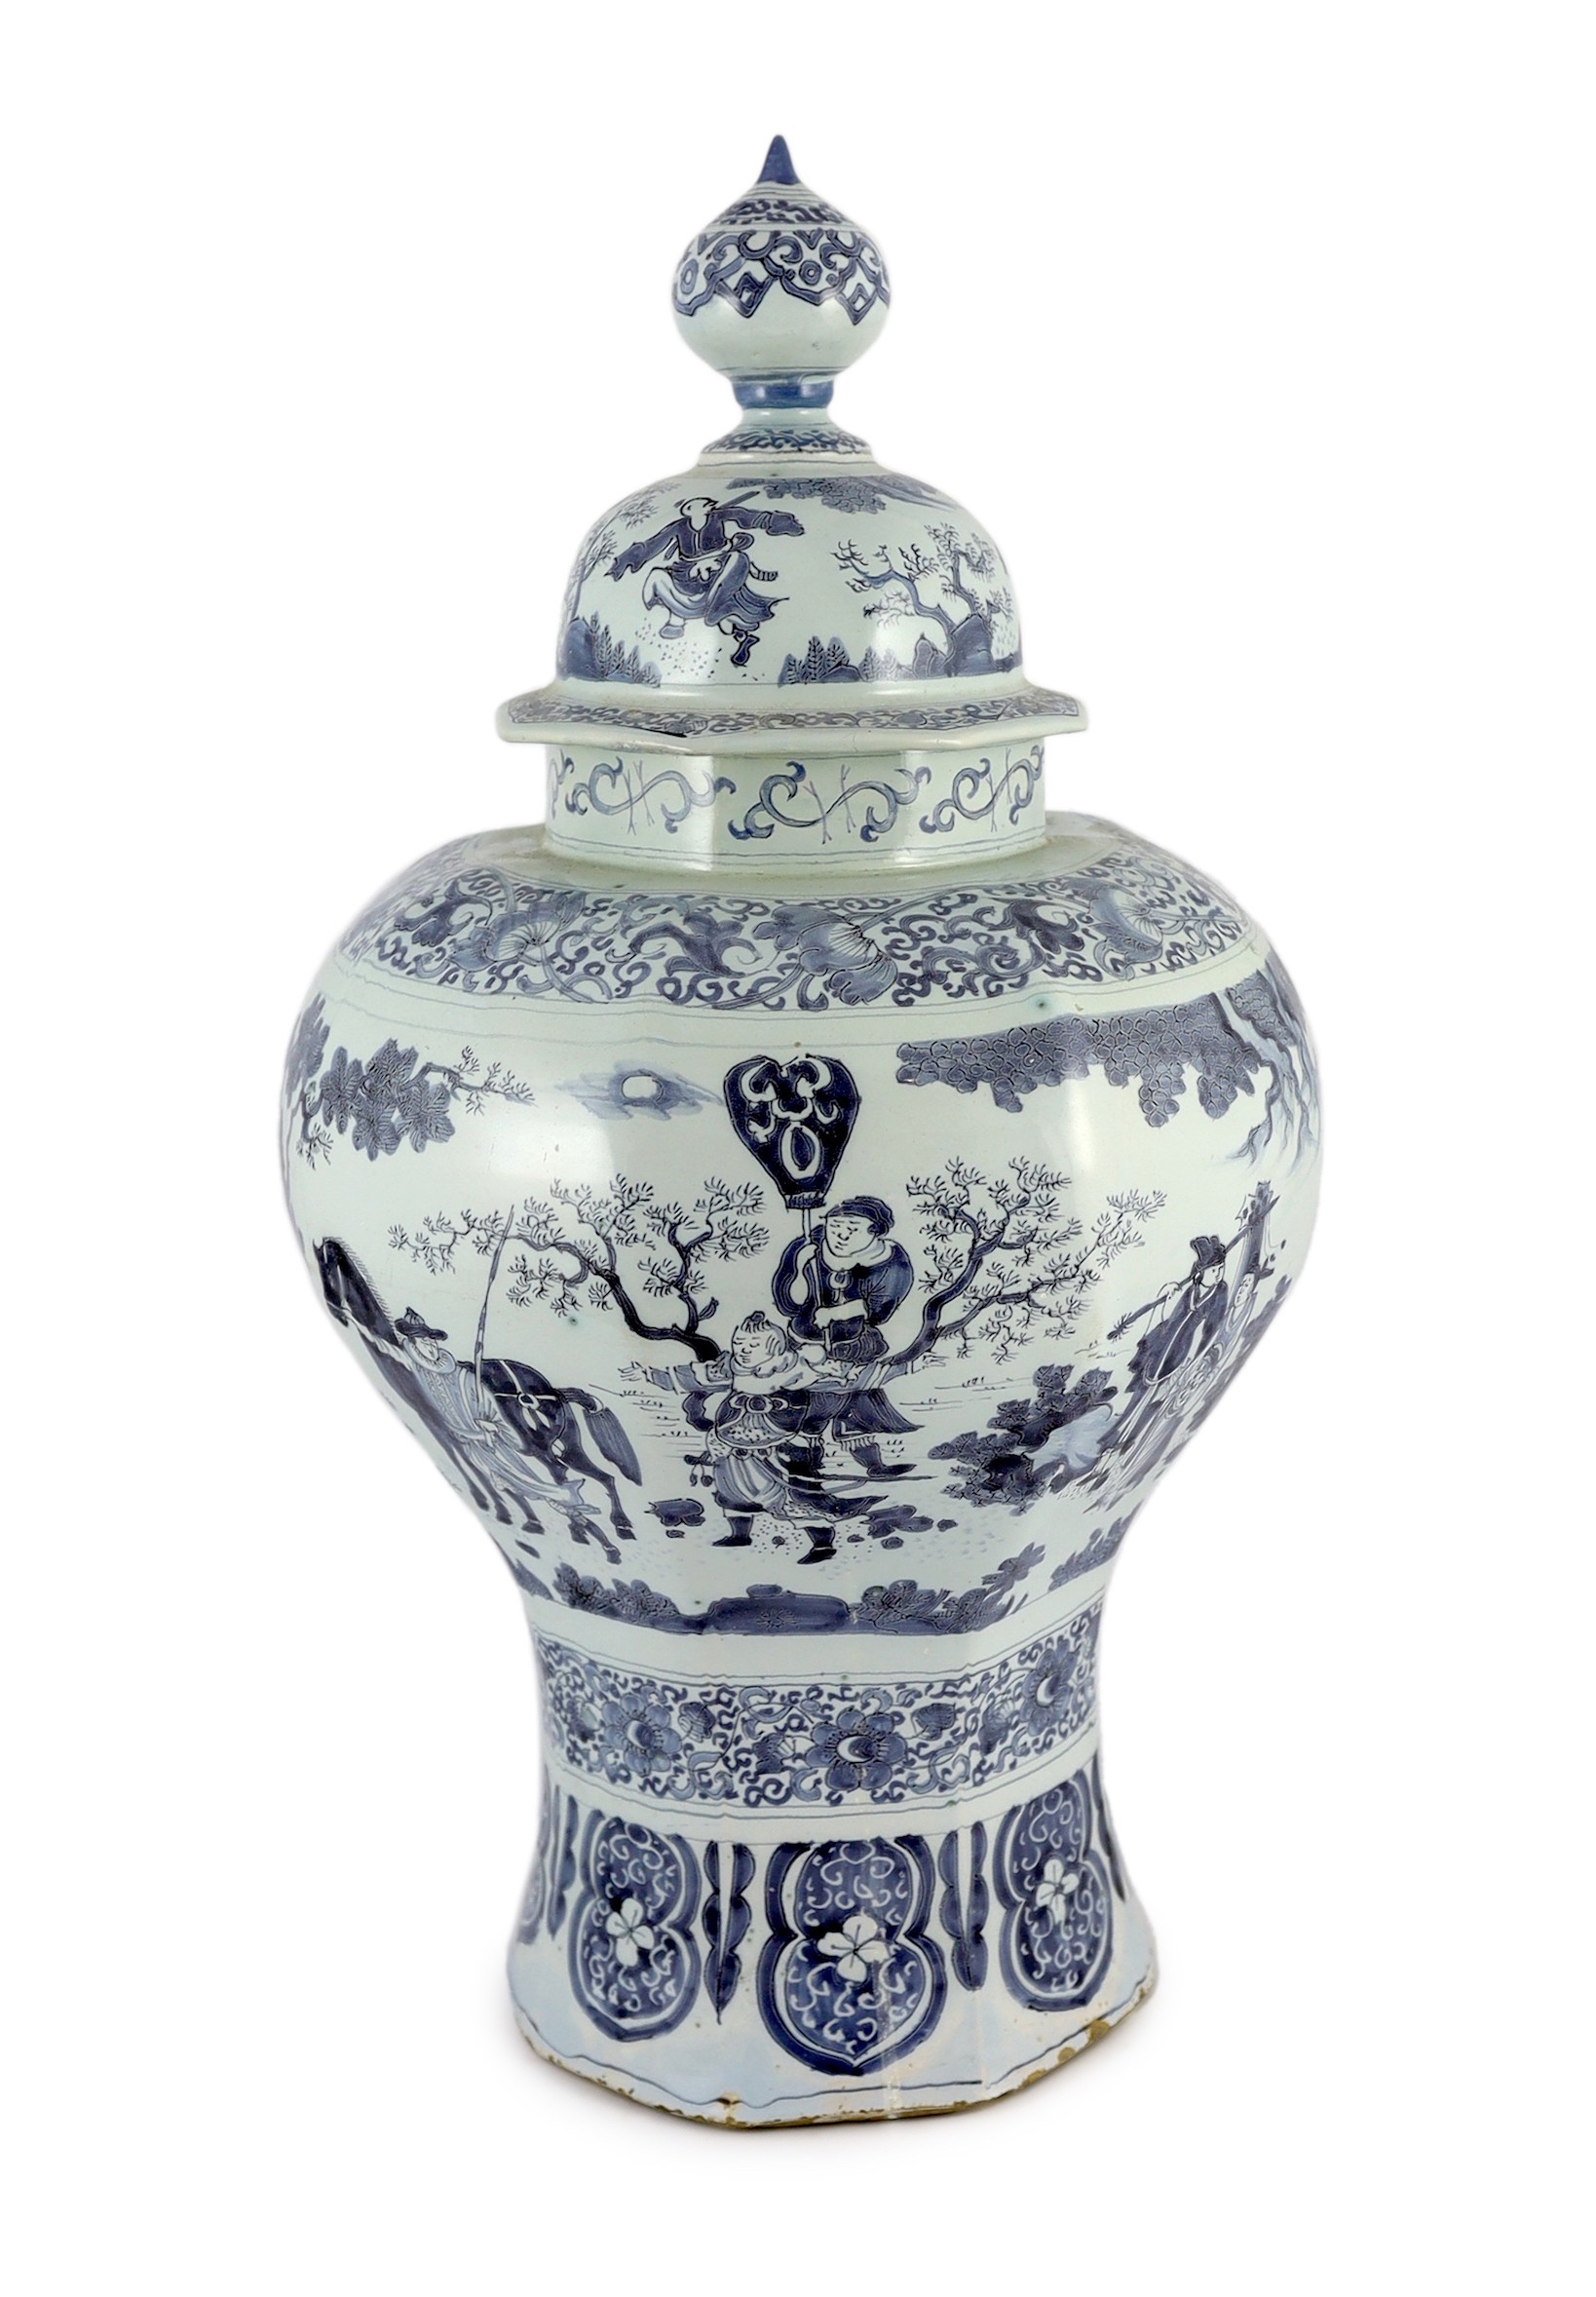 A massive Delft blue and white inverted baluster vase and cover, c.1700, 57.5cm high, neck and cover restored                                                                                                               